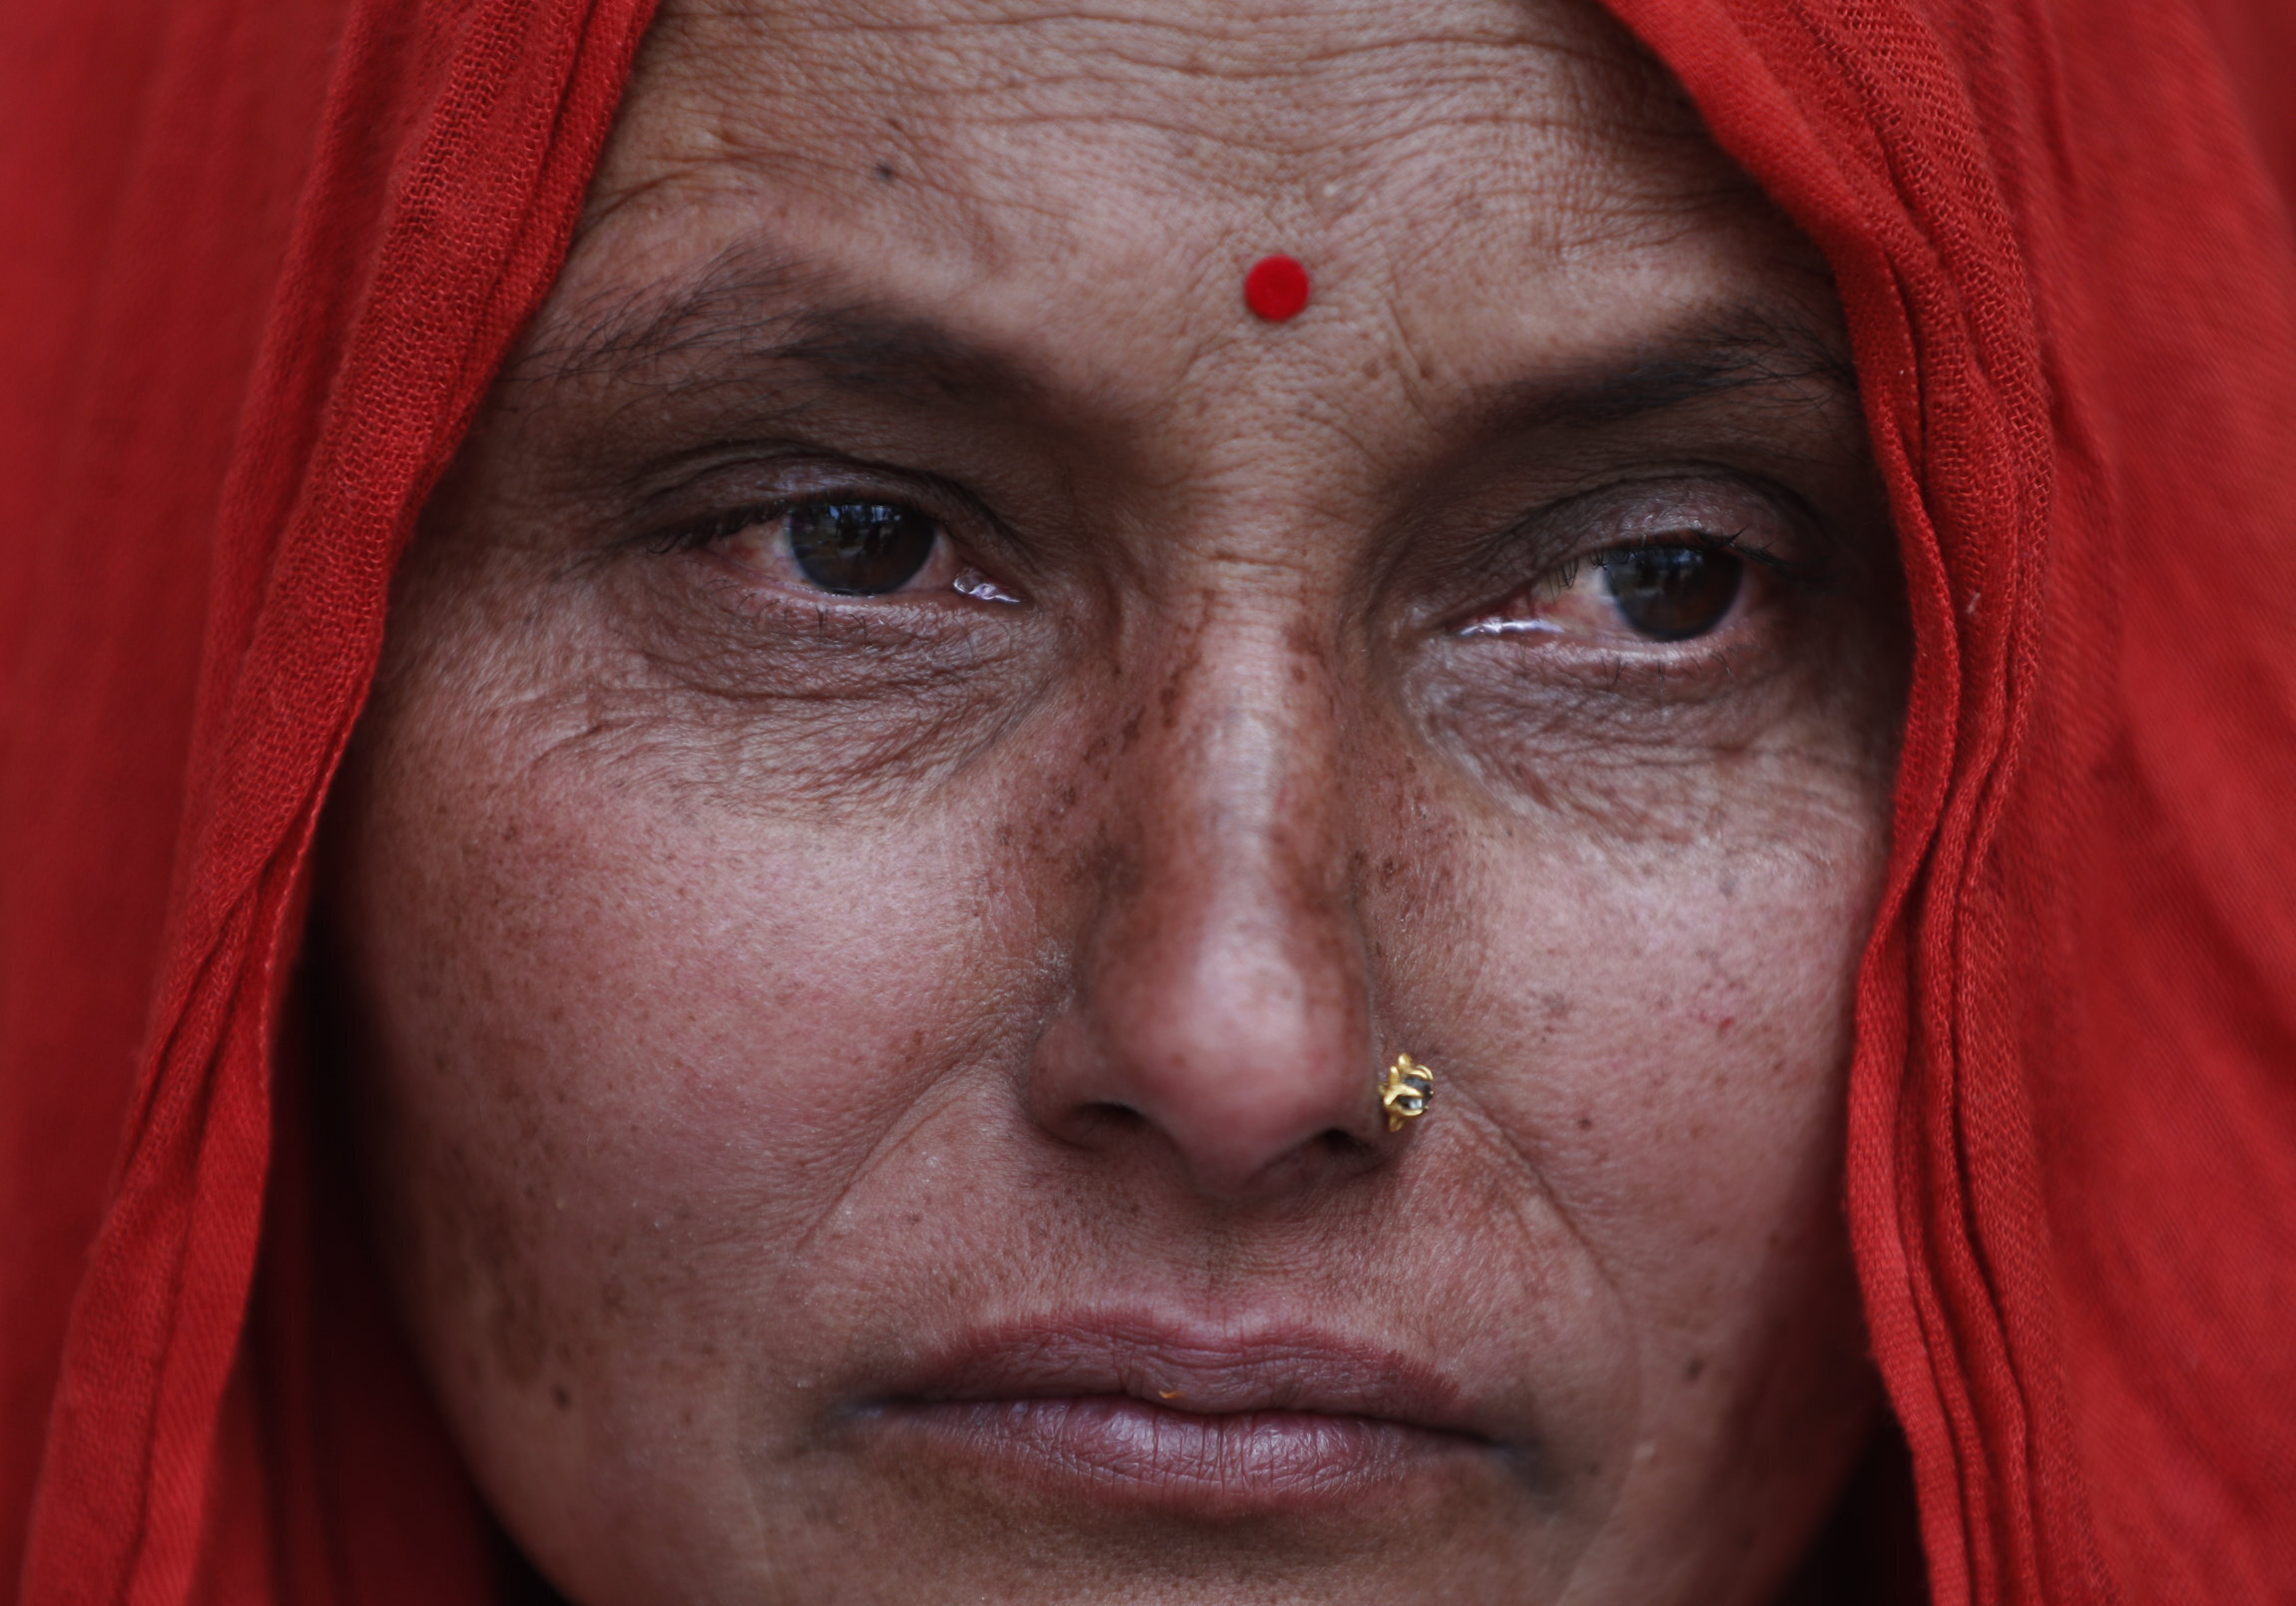 Sita Adhikari, 44, a cancer patient cries while she waits for a vehicle to go back to her village, during lockdown to prevent the spread of the new coronavirus in Bhaktapur, Nepal, Monday, April 20, 2020. The supreme court passed an interim order on Friday instructing the Nepalese government to ensure free transportation for stranded daily wage workers and others making the long journey back to their respective villages on foot. (AP Photo/Niranjan Shrestha)